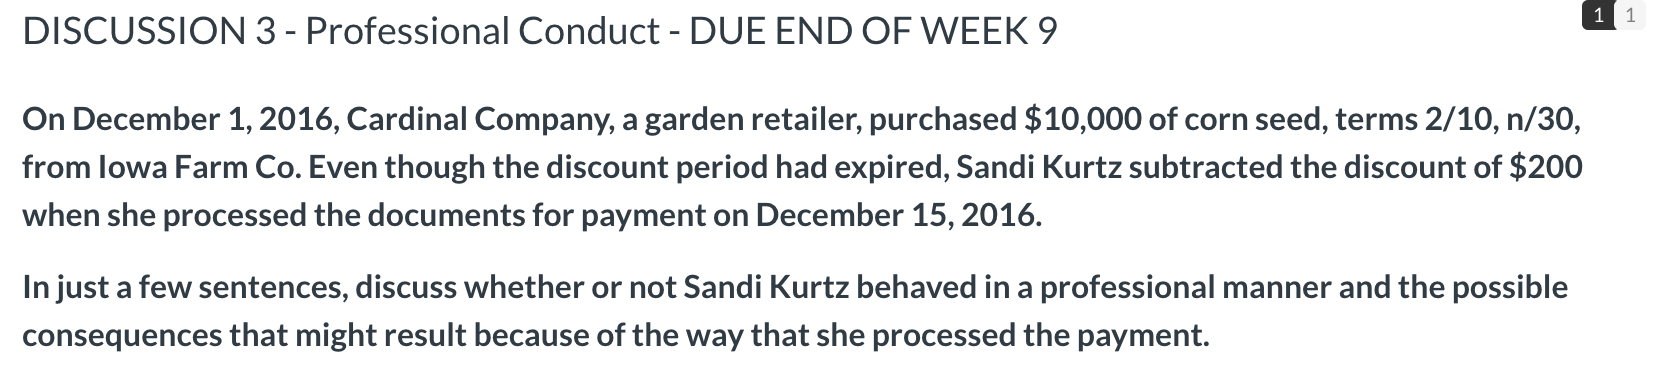 DISCUSSION 3 - Professional Conduct - DUE END OF WEEK 9
On December 1, 2016, Cardinal Company, a garden retailer, purchased $10,000 of corn seed, terms 2/10, n/30,
from lowa Farm Co. Even though the discount period had expired, Sandi Kurtz subtracted the discount of $200
when she processed the documents for payment on December 15, 2016.
In just a few sentences, discuss whether or not Sandi Kurtz behaved in a professional manner and the possible
consequences that might result because of the way that she processed the payment.
